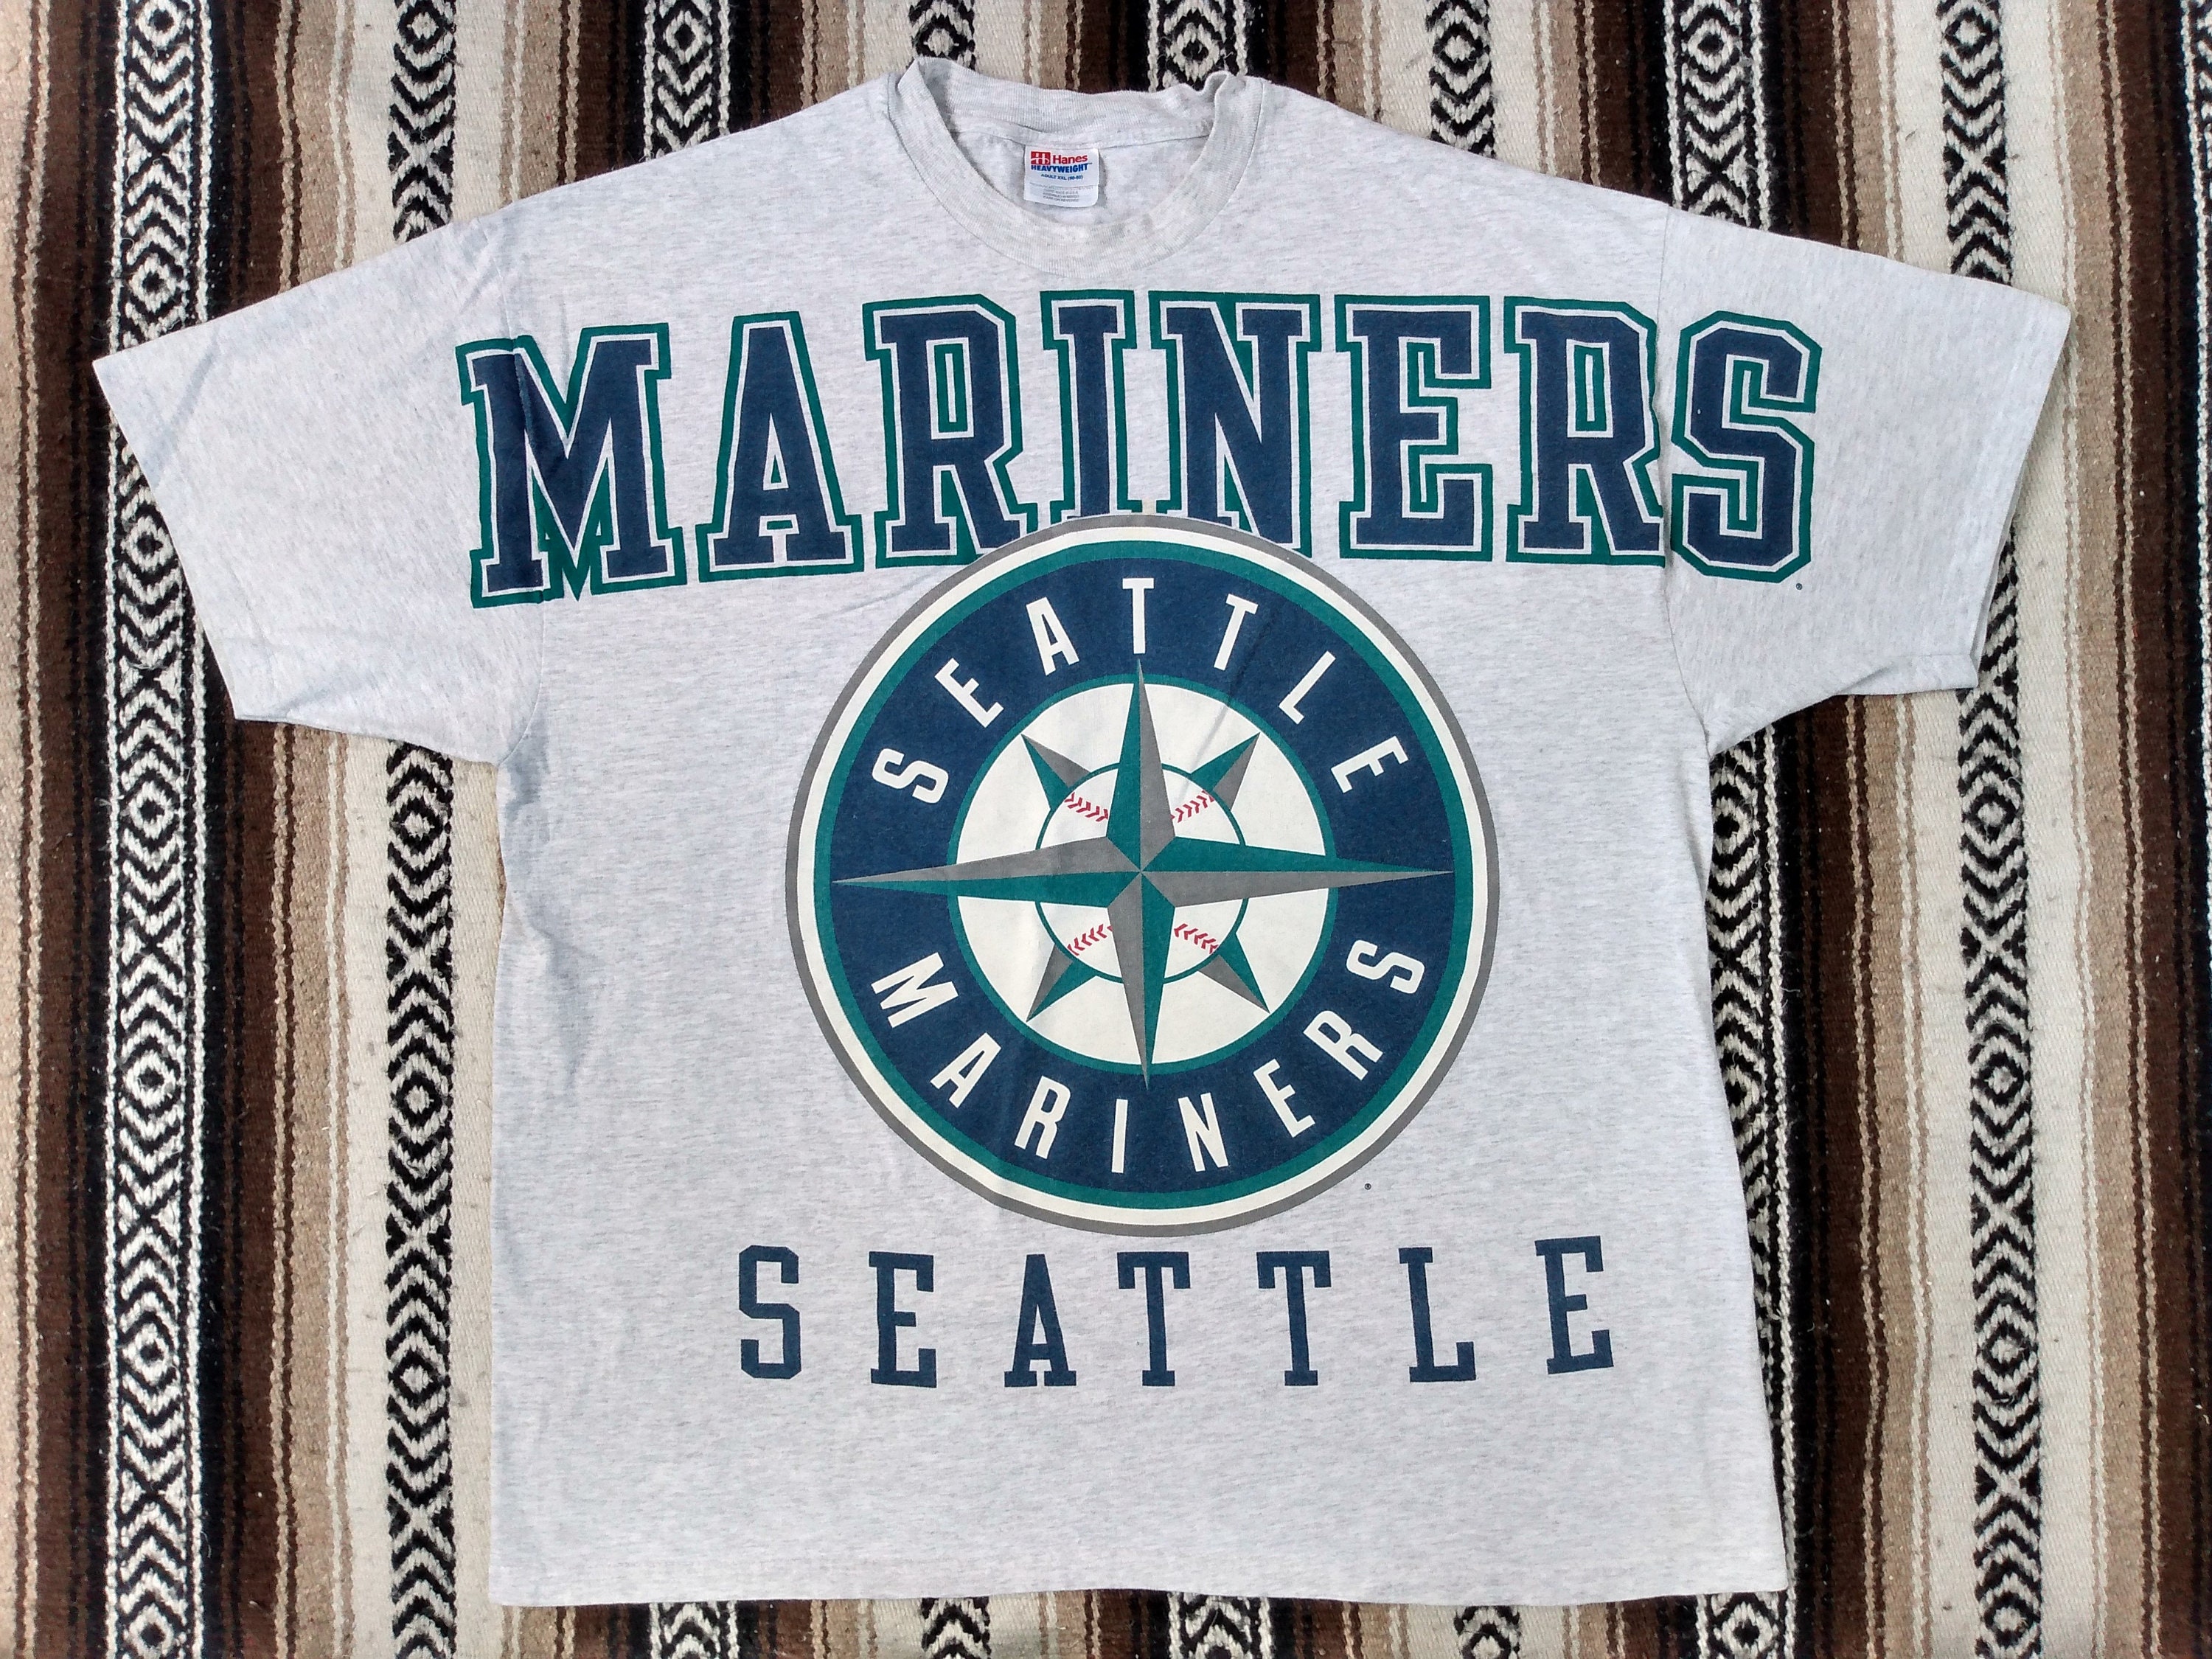 Vintage Seattle Mariners MLB single stitch T-shirt. Made in the USA. Large